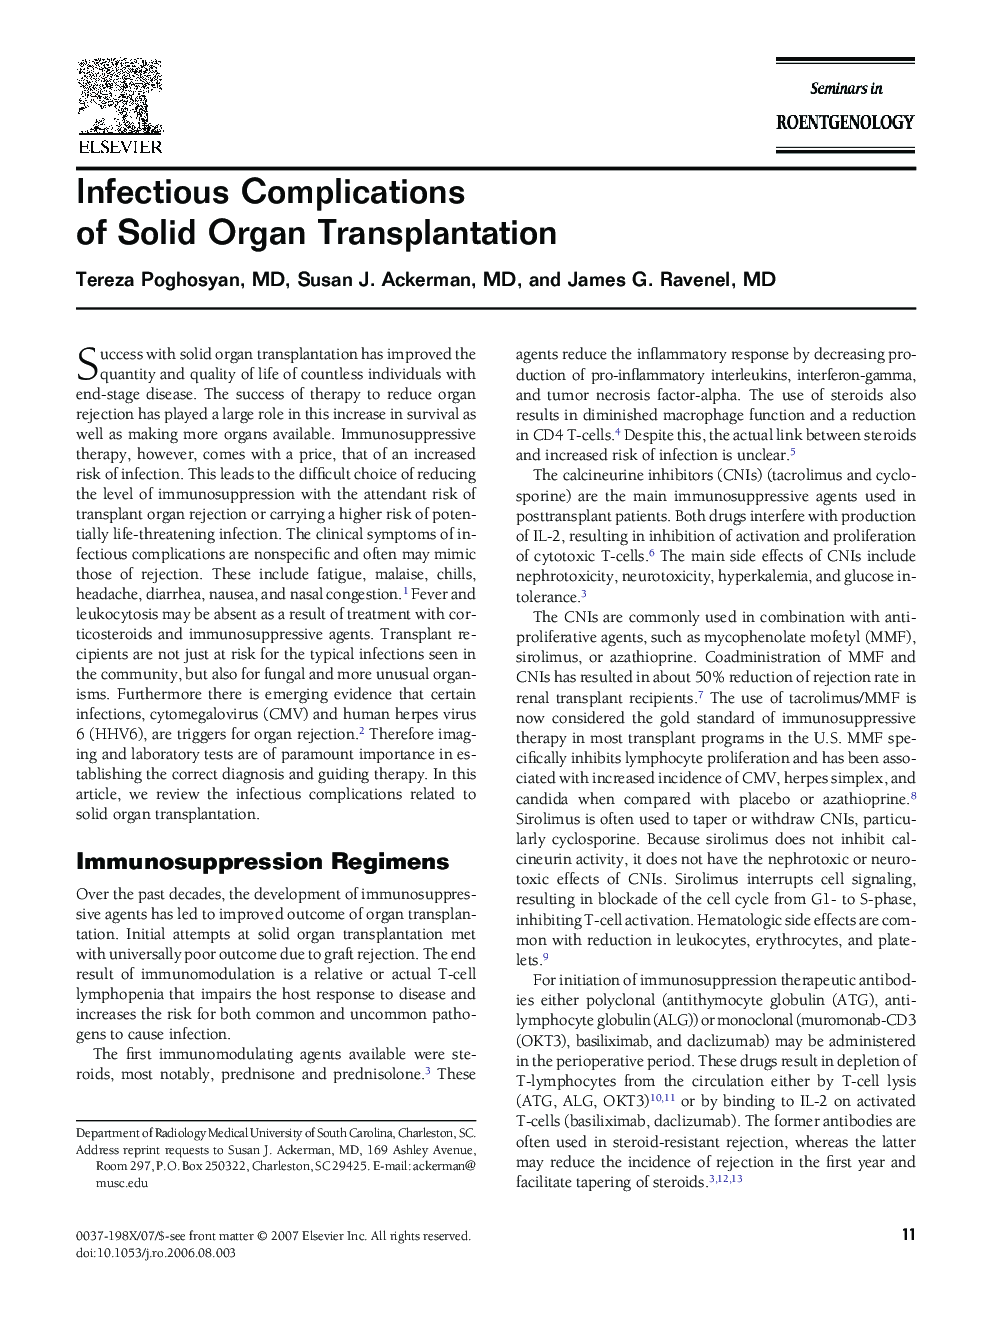 Infectious Complications of Solid Organ Transplantation